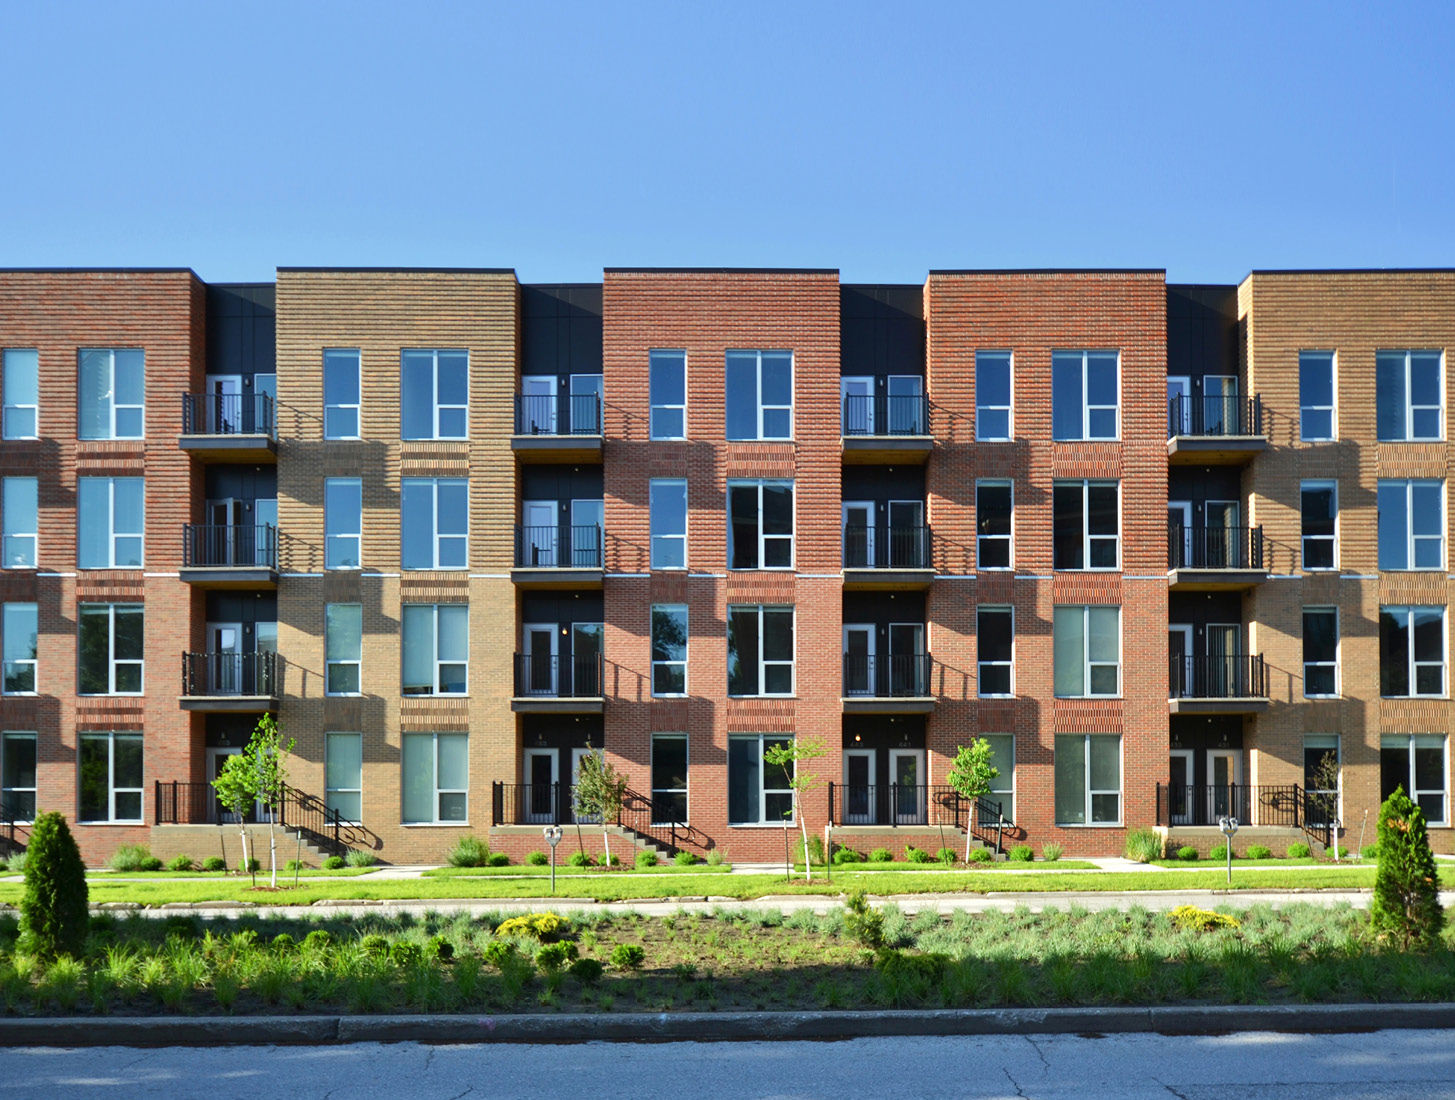 Tips for Planning a Multifamily or Mixed-Use Development